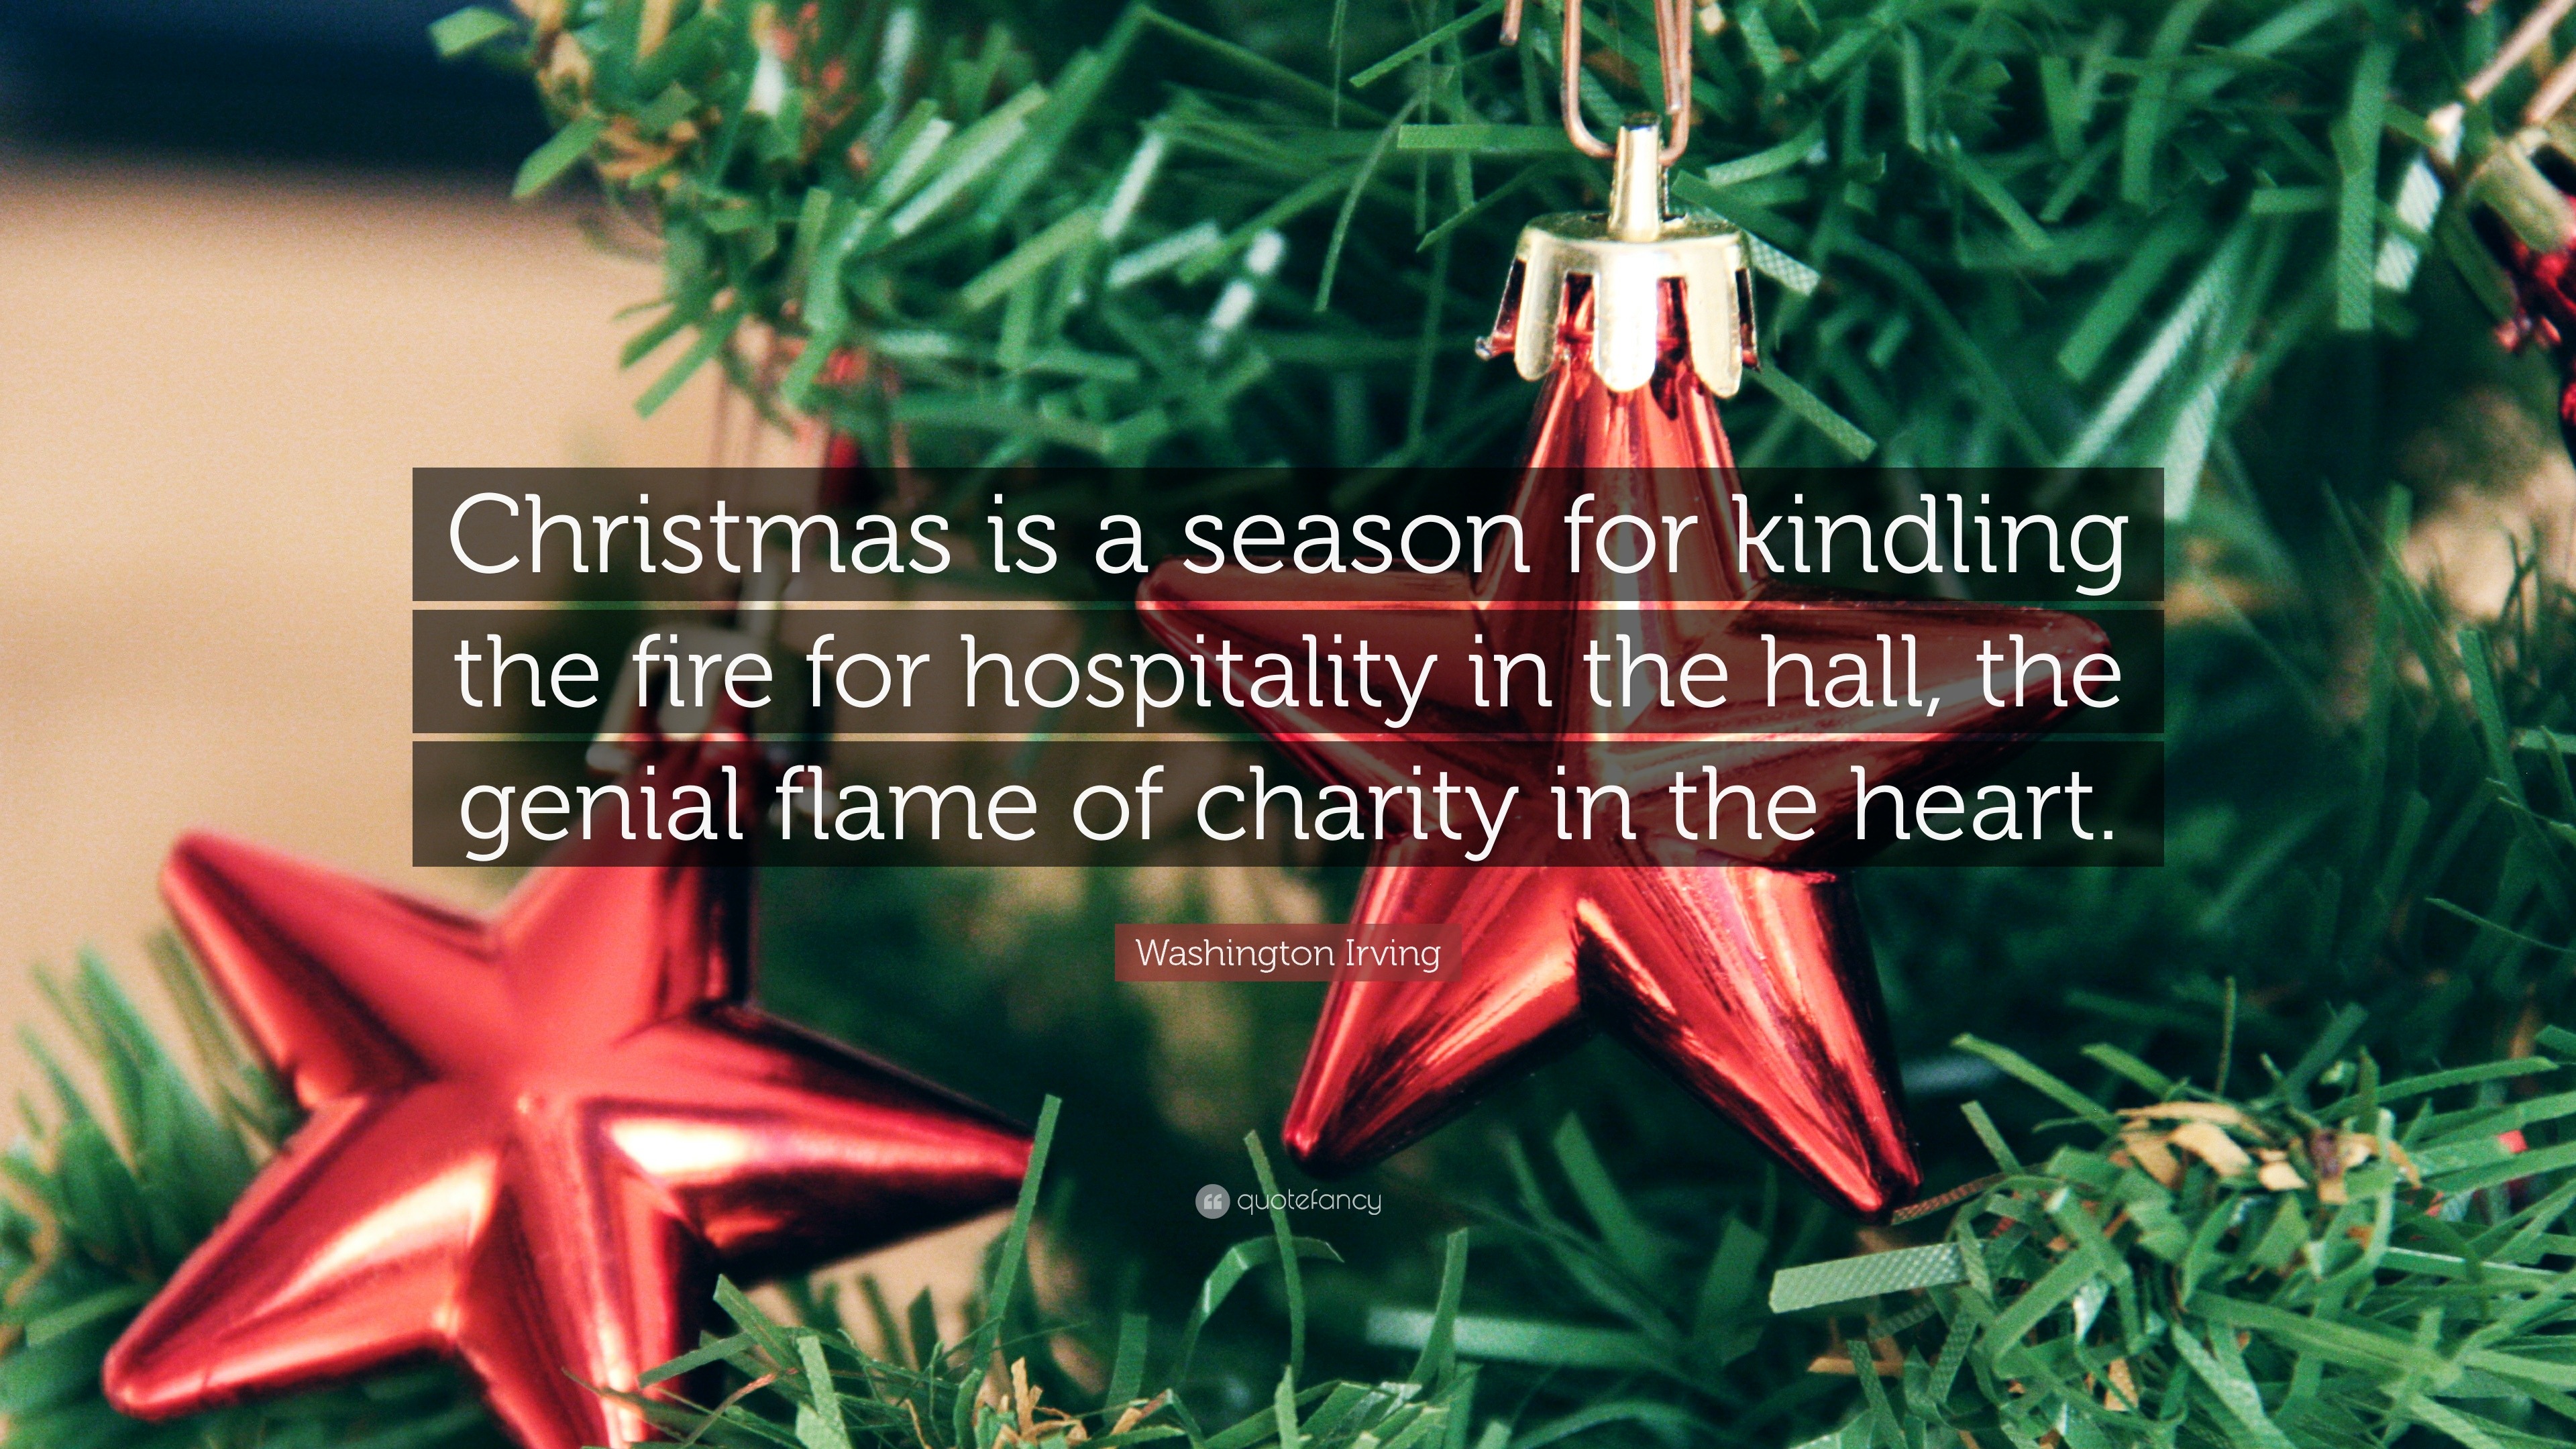 Washington Irving Quote “Christmas is a season for kindling the fire for hospitality in